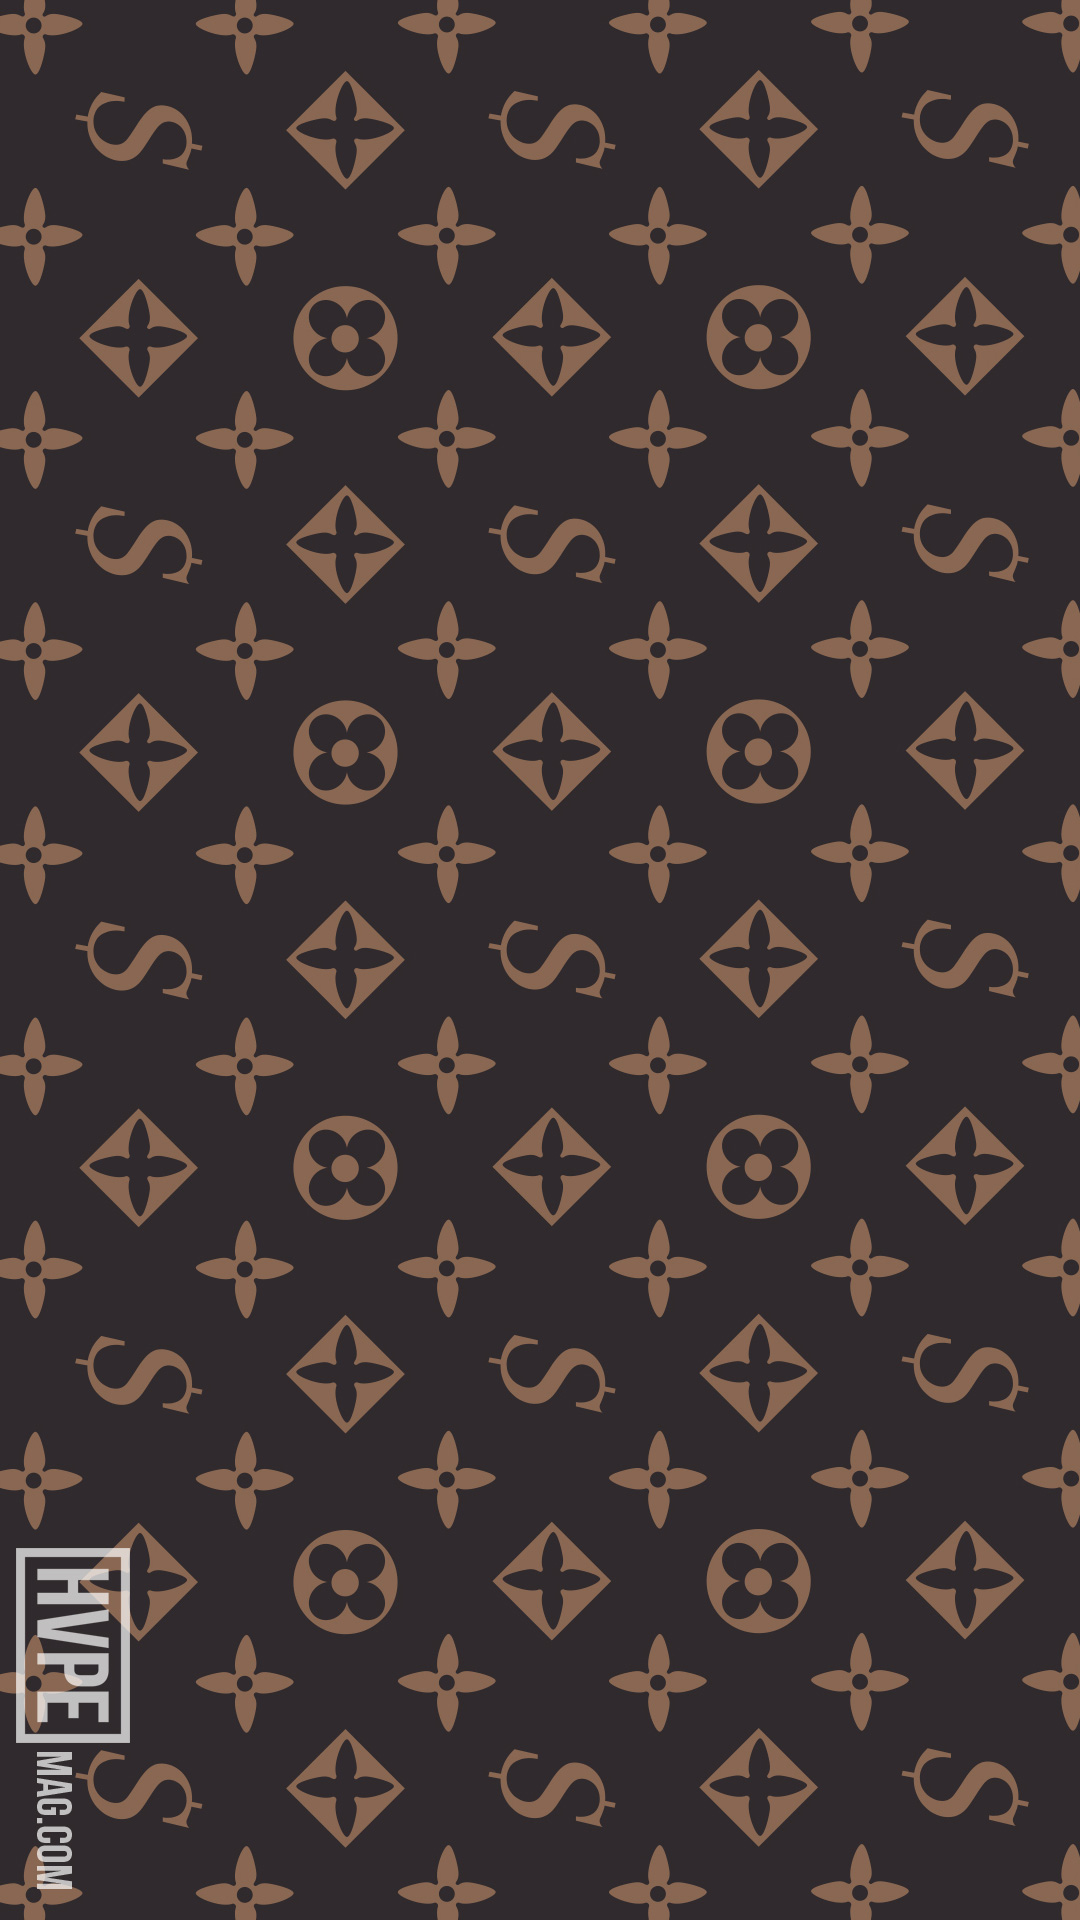 Download Supreme With Louis Vuitton Background